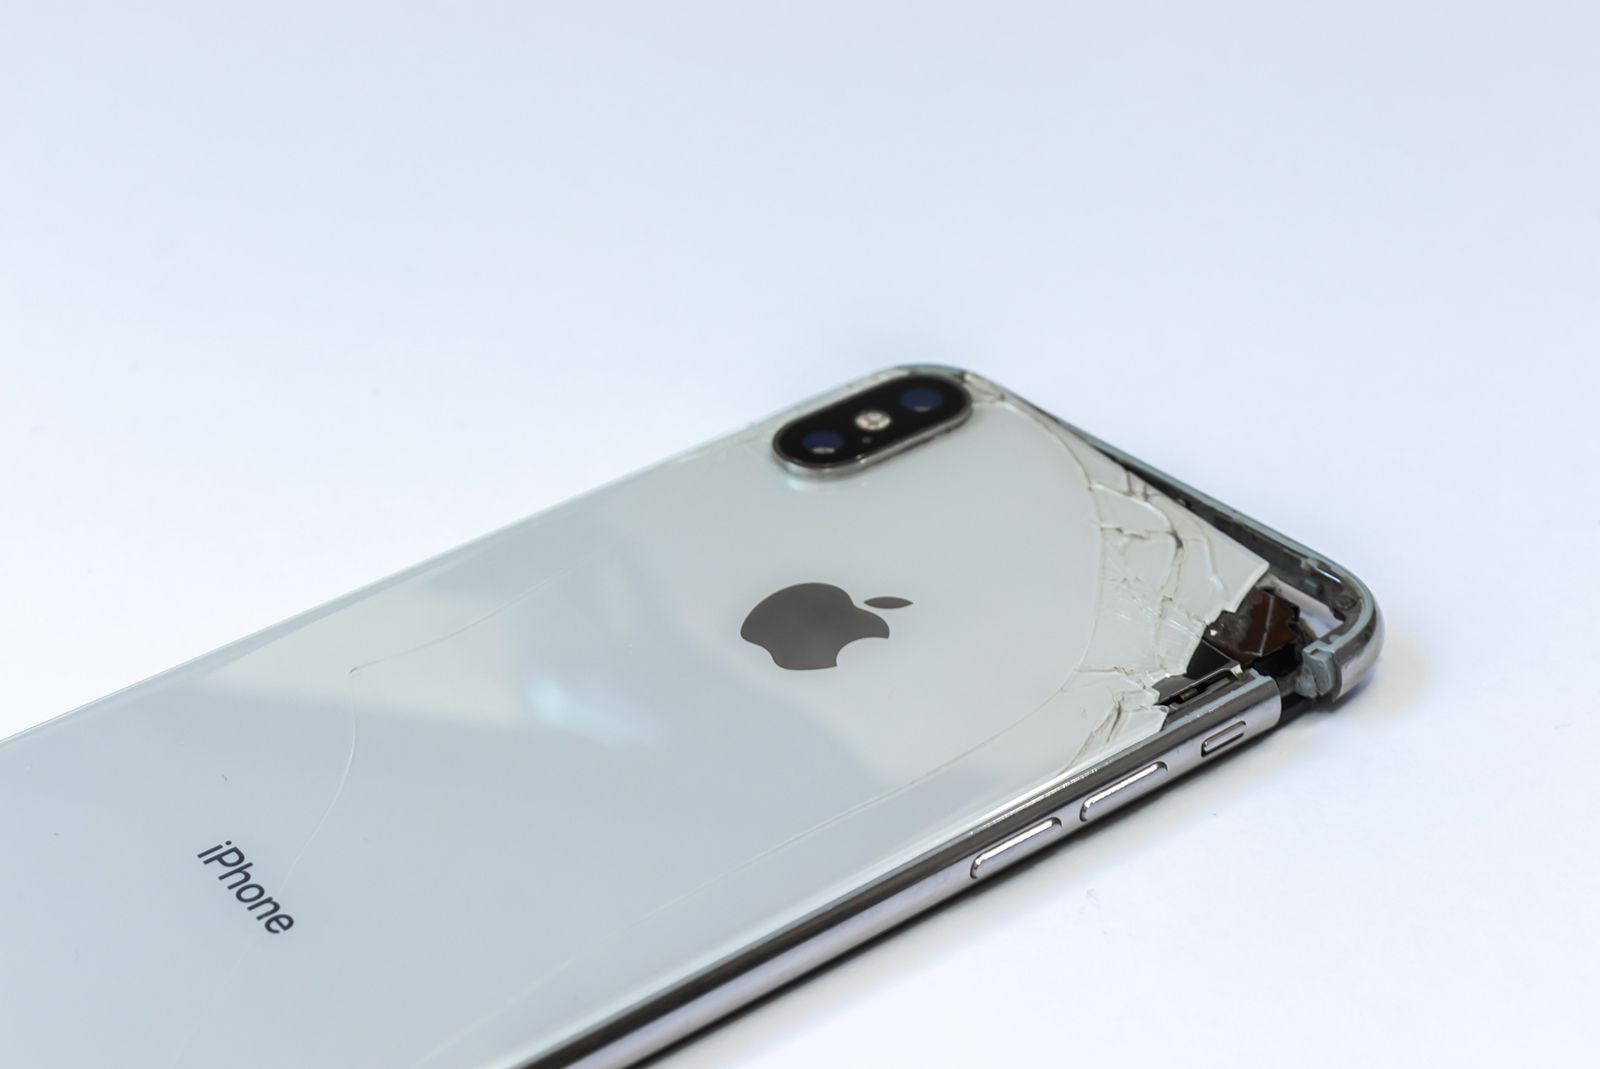 Apple Self Service Repair explained: How to fix an iPhone or Mac yourself photo 2